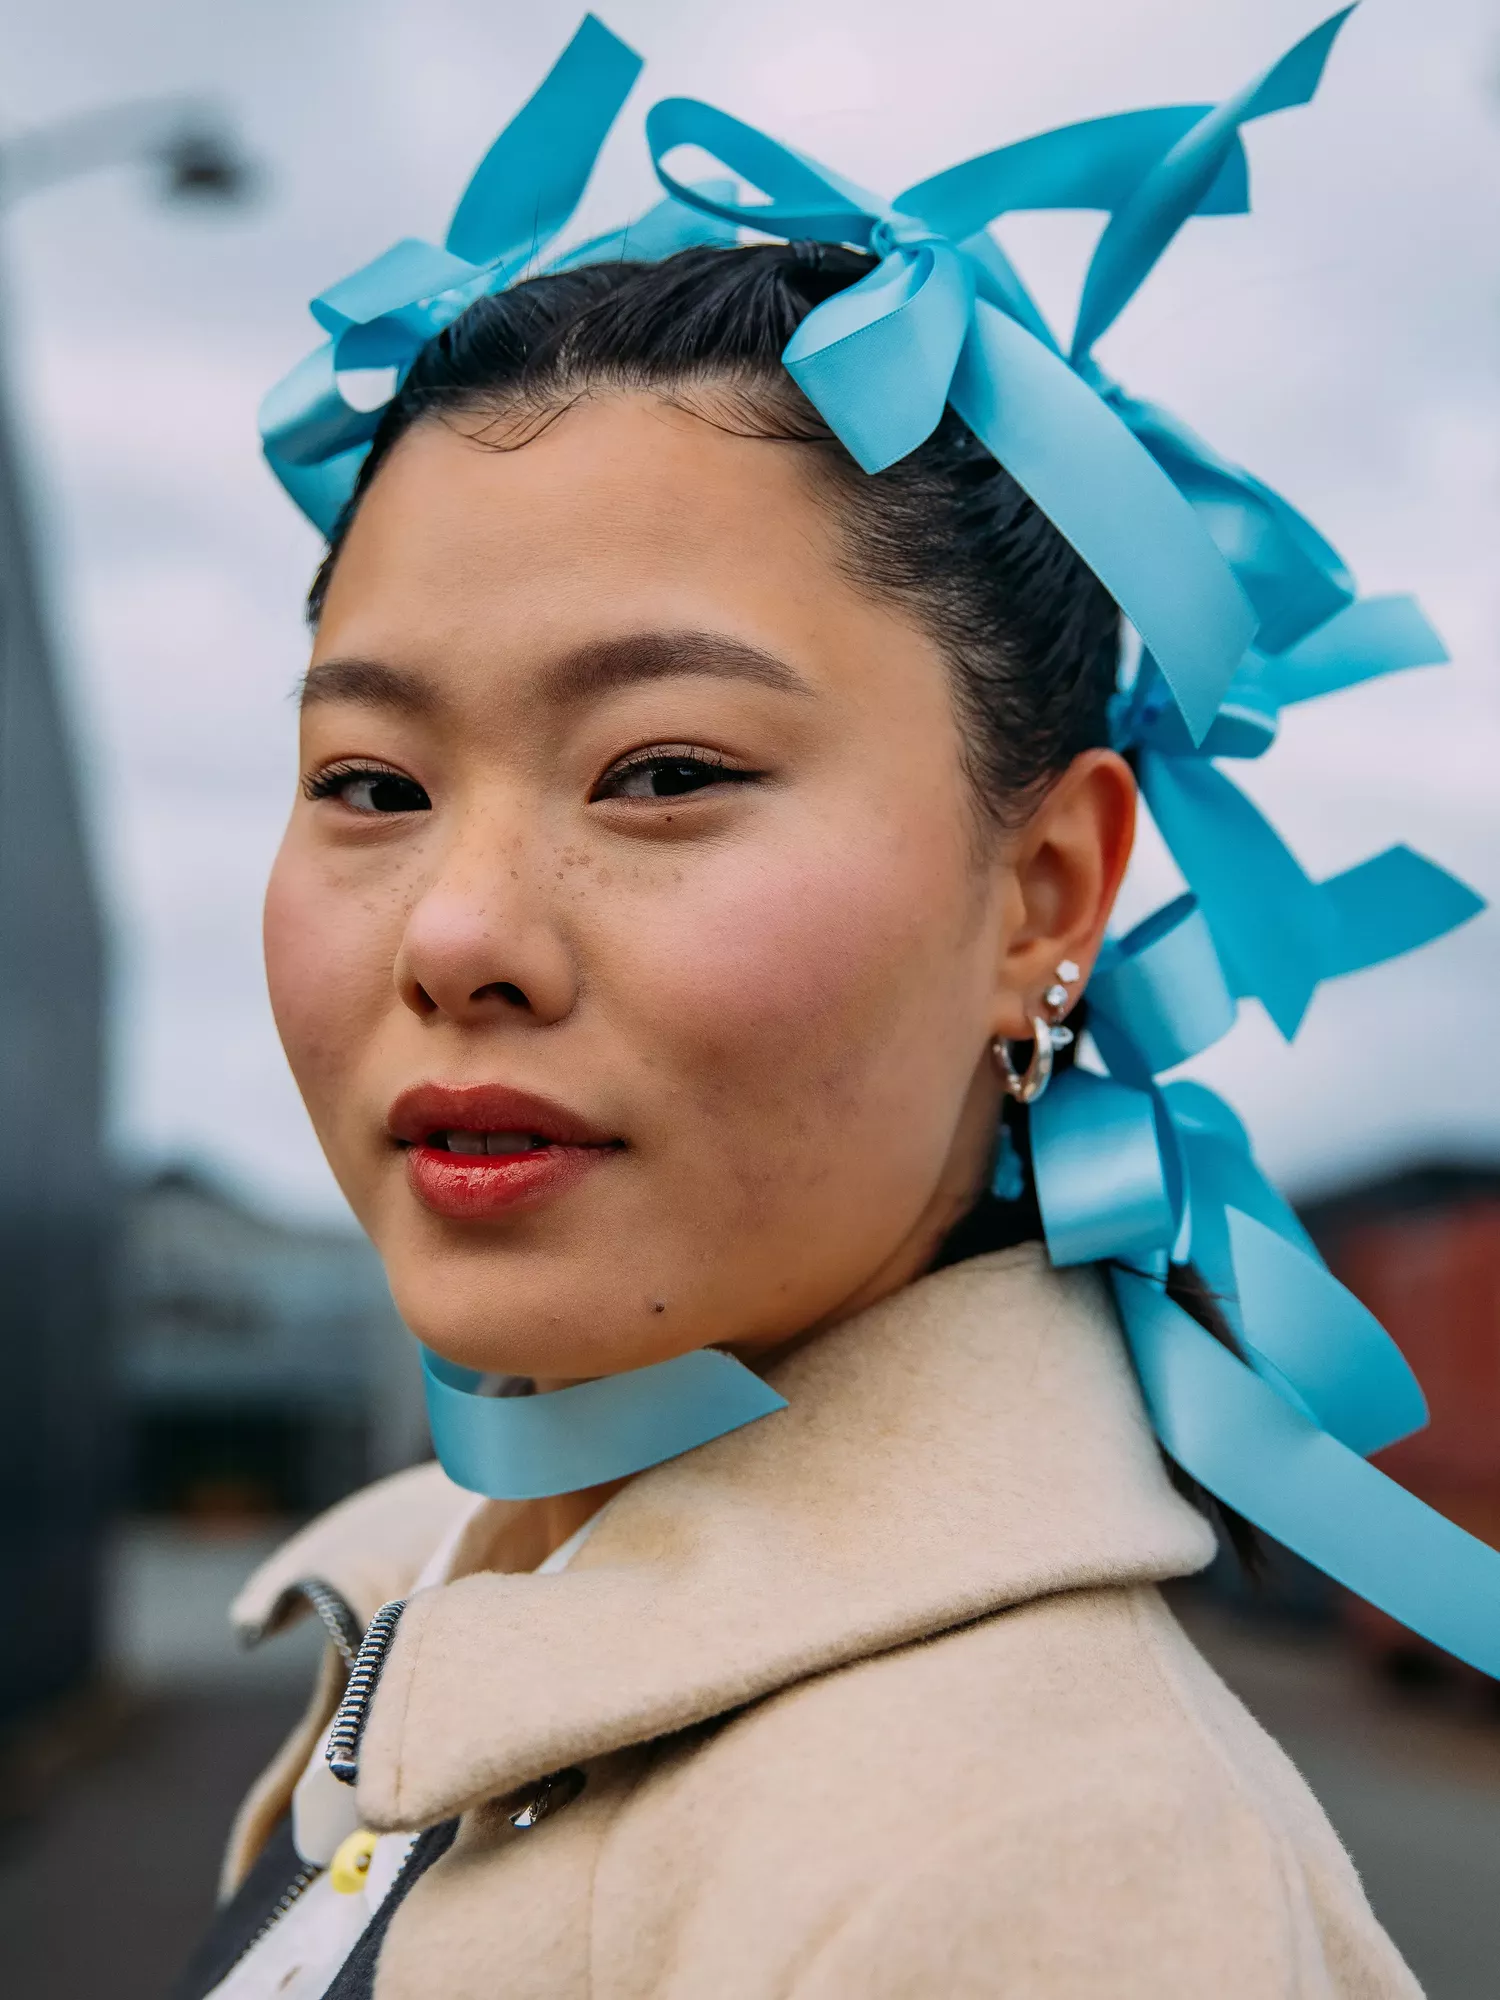 The Ribbons in Hair Trend Is Already All Over Fashion Week